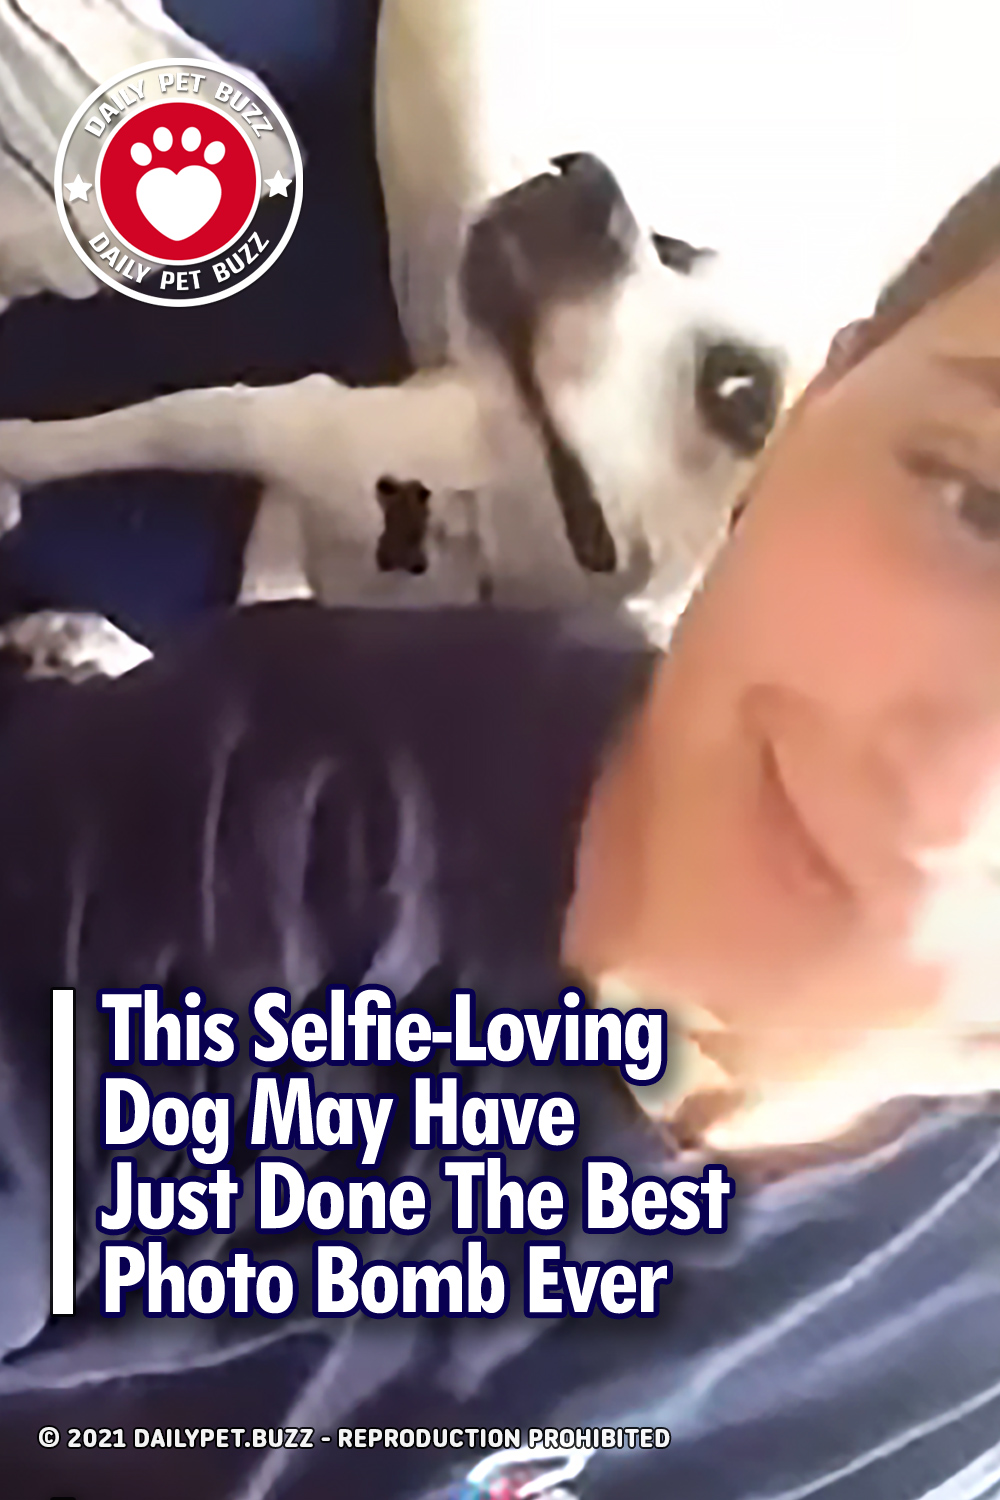 This Selfie-Loving Dog May Have Just Done The Best Photo Bomb Ever